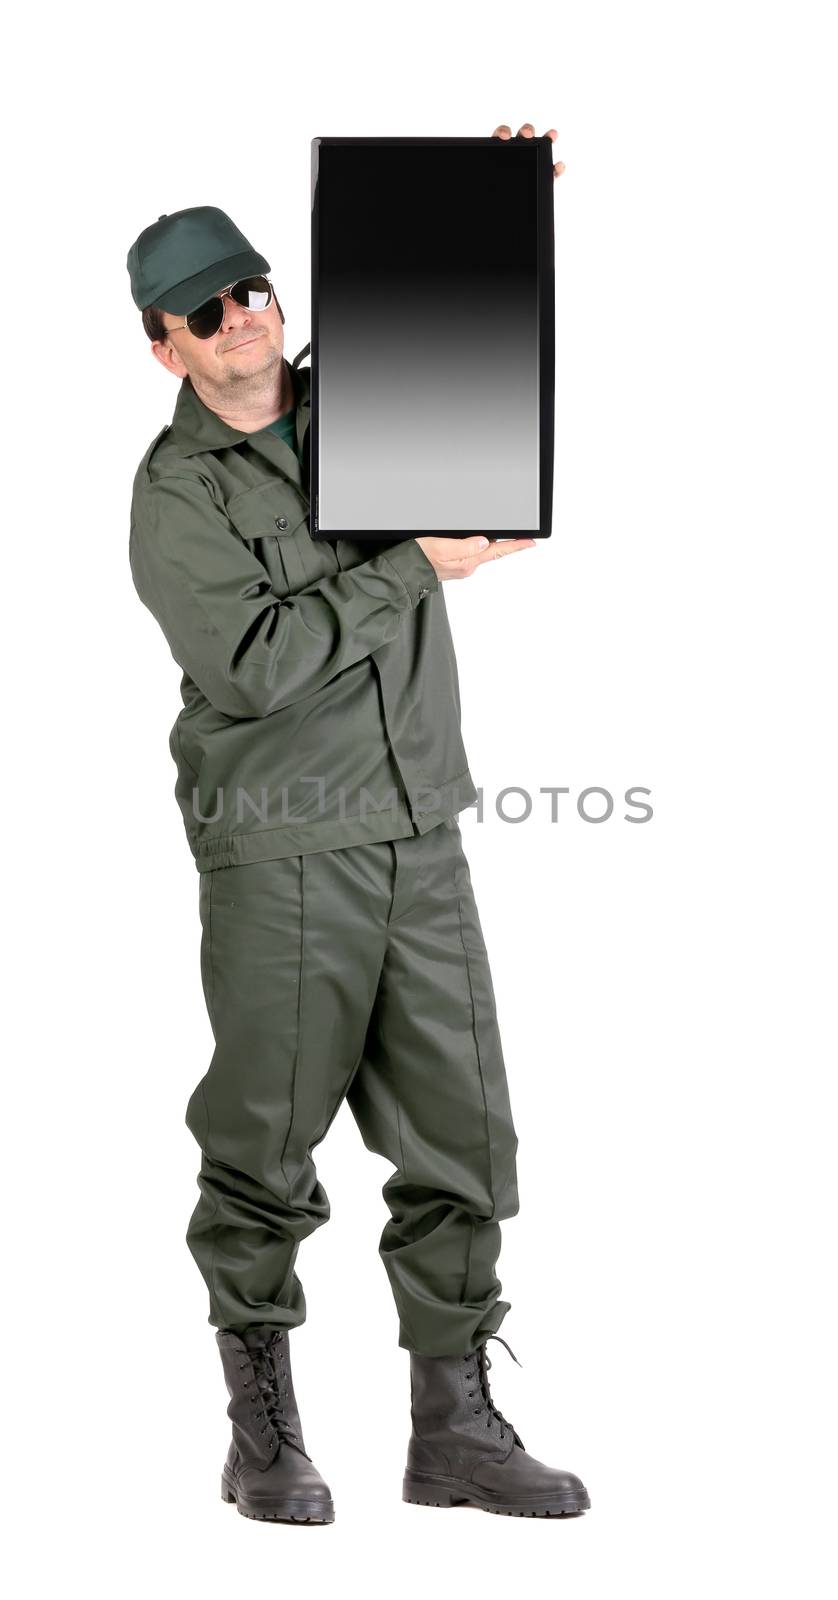 Man holding LCD screen. by indigolotos